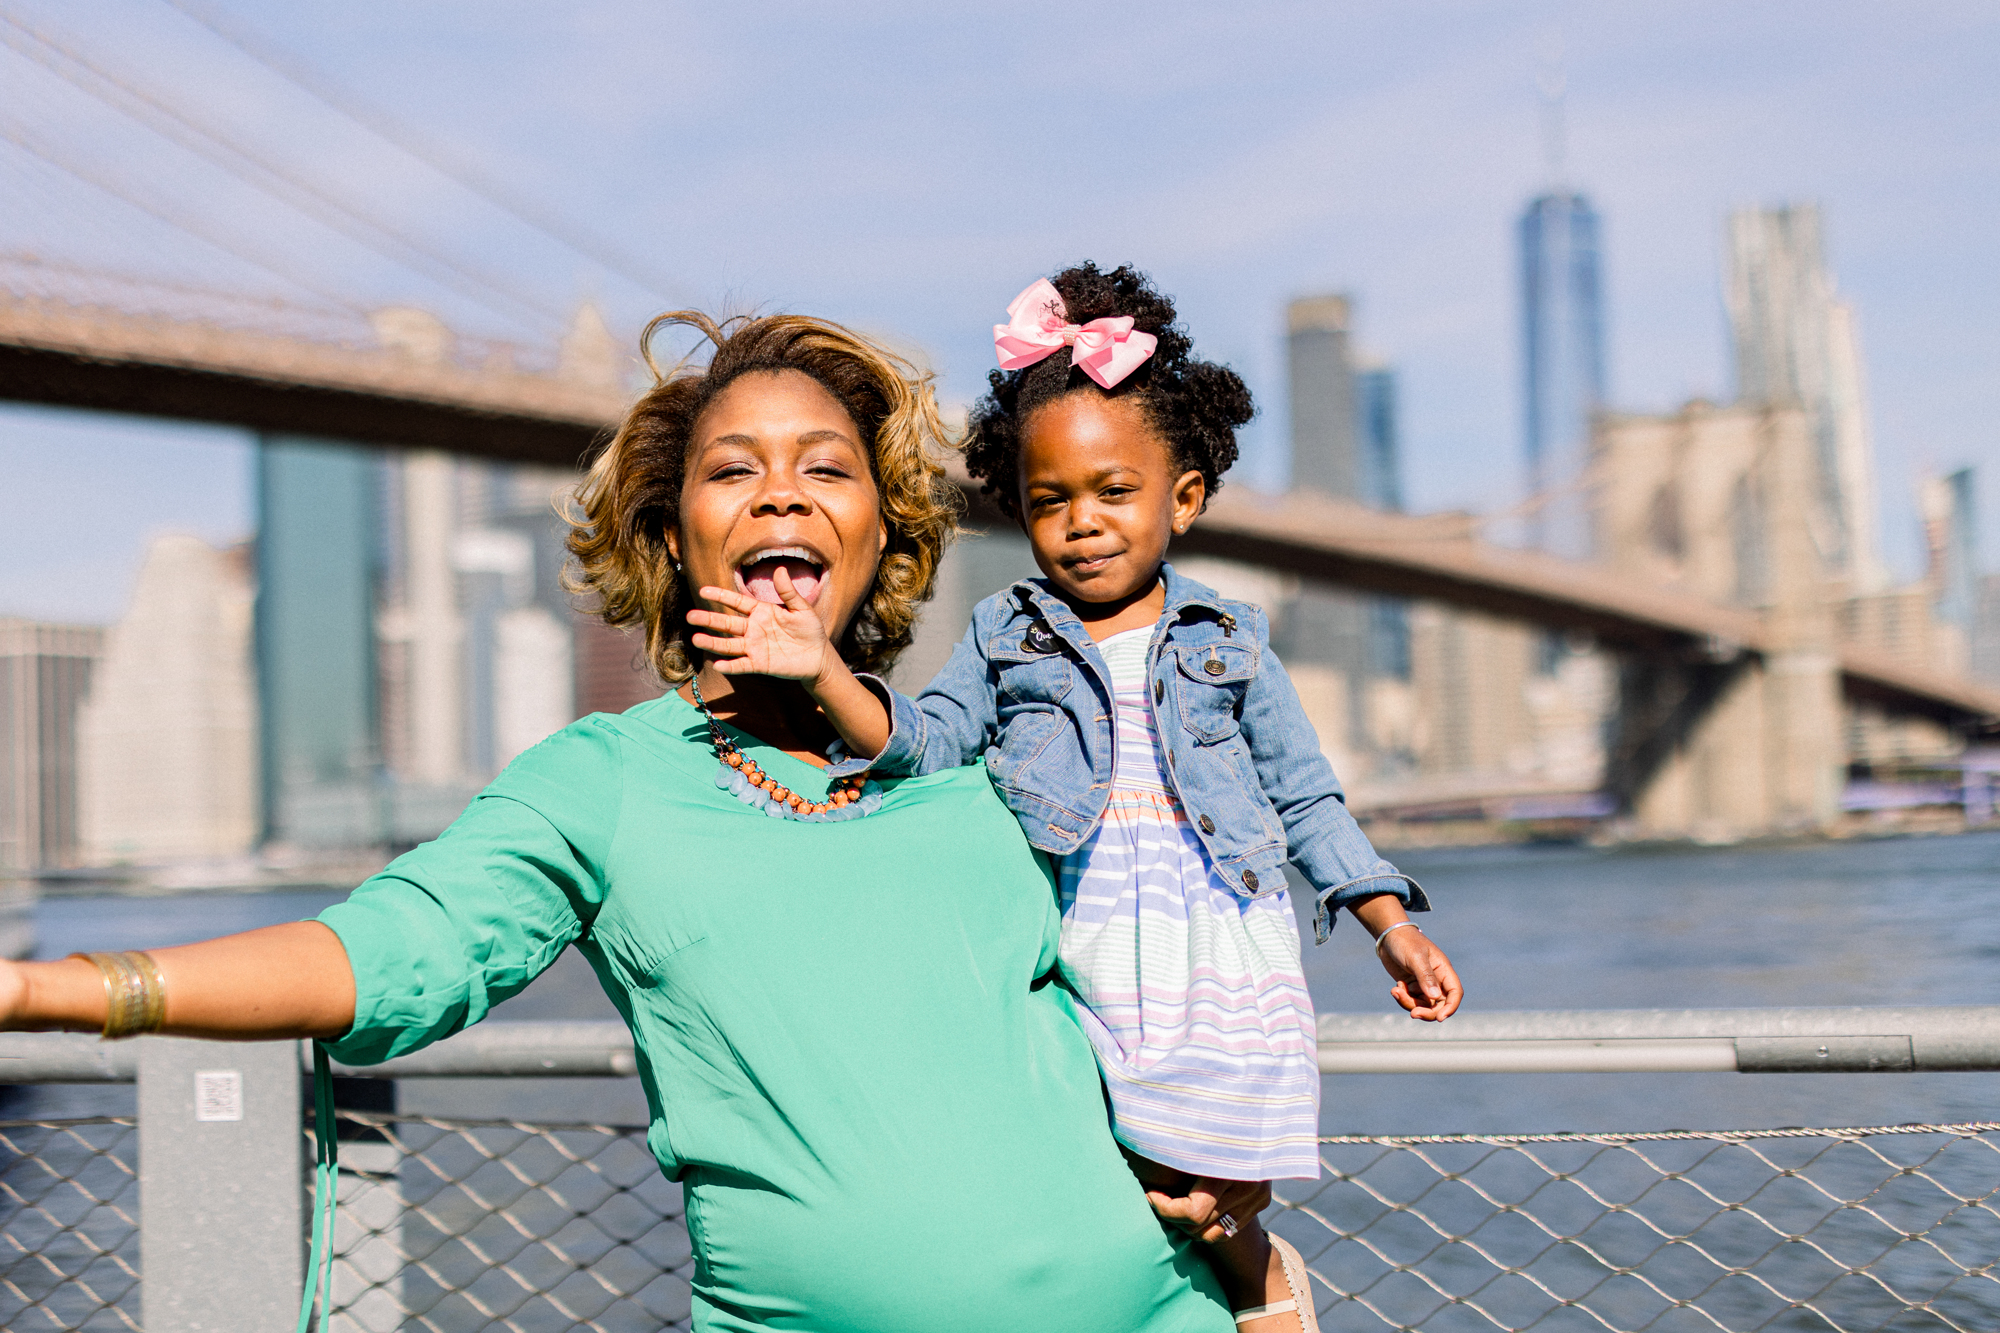 Playful Brooklyn Family Photography